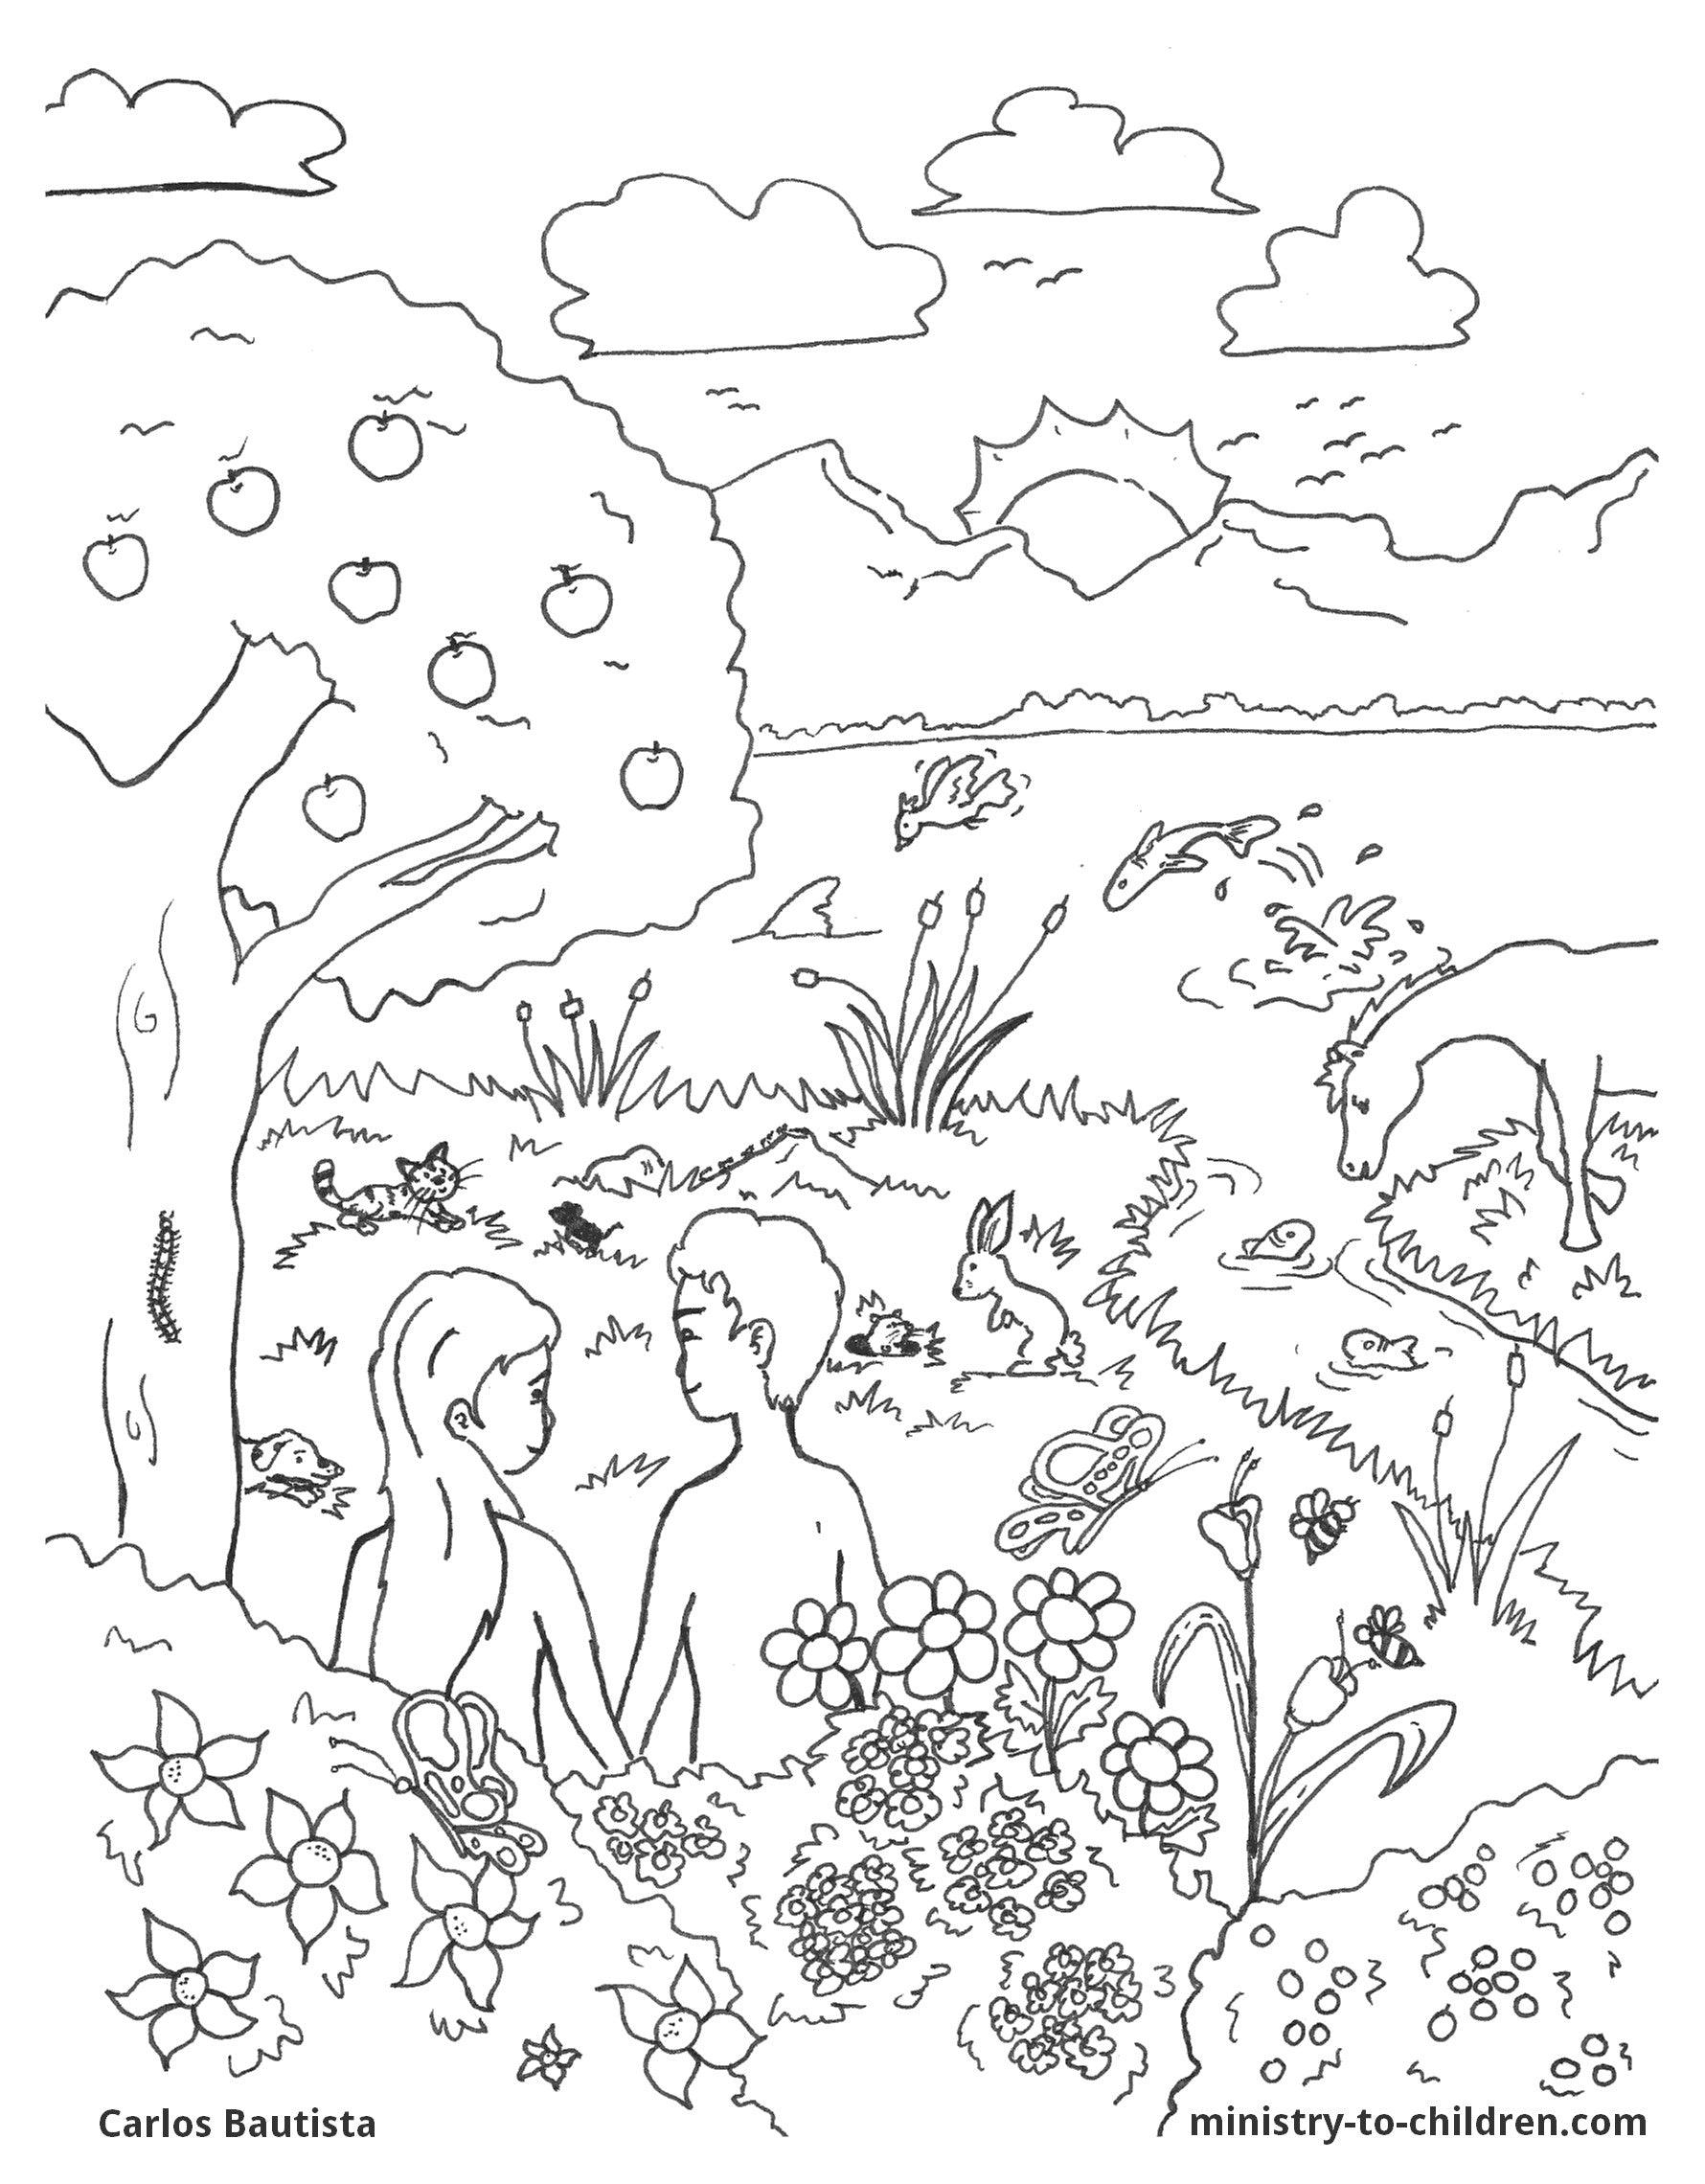 gods creation of the world coloring pages